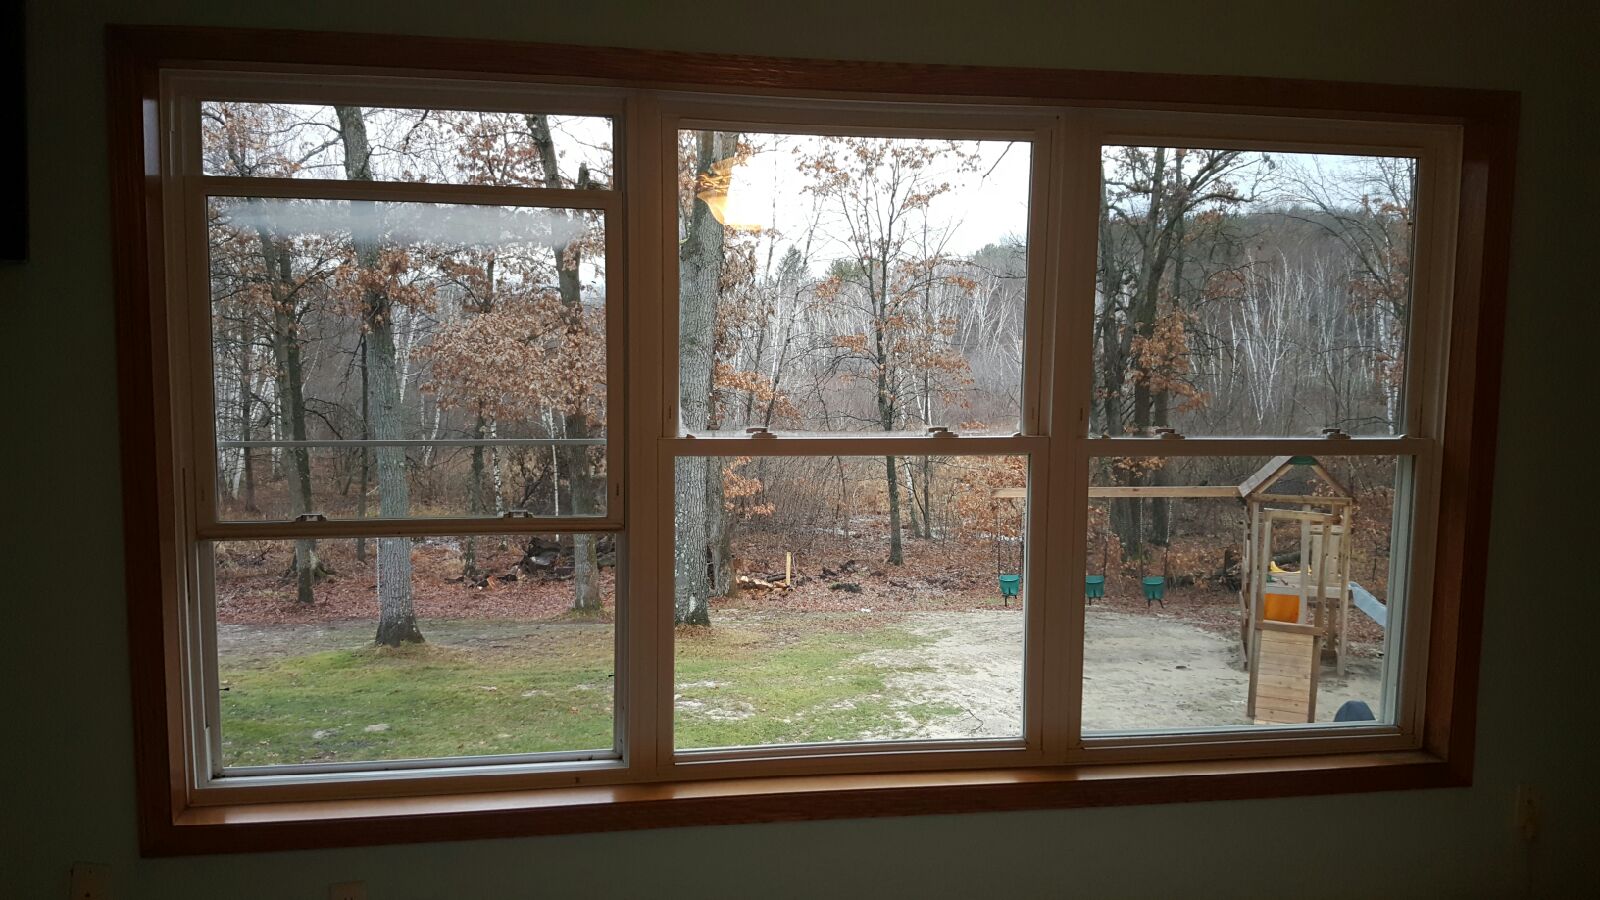 BEFORE - Old window with seal failure (you can tell by fogged up glass)